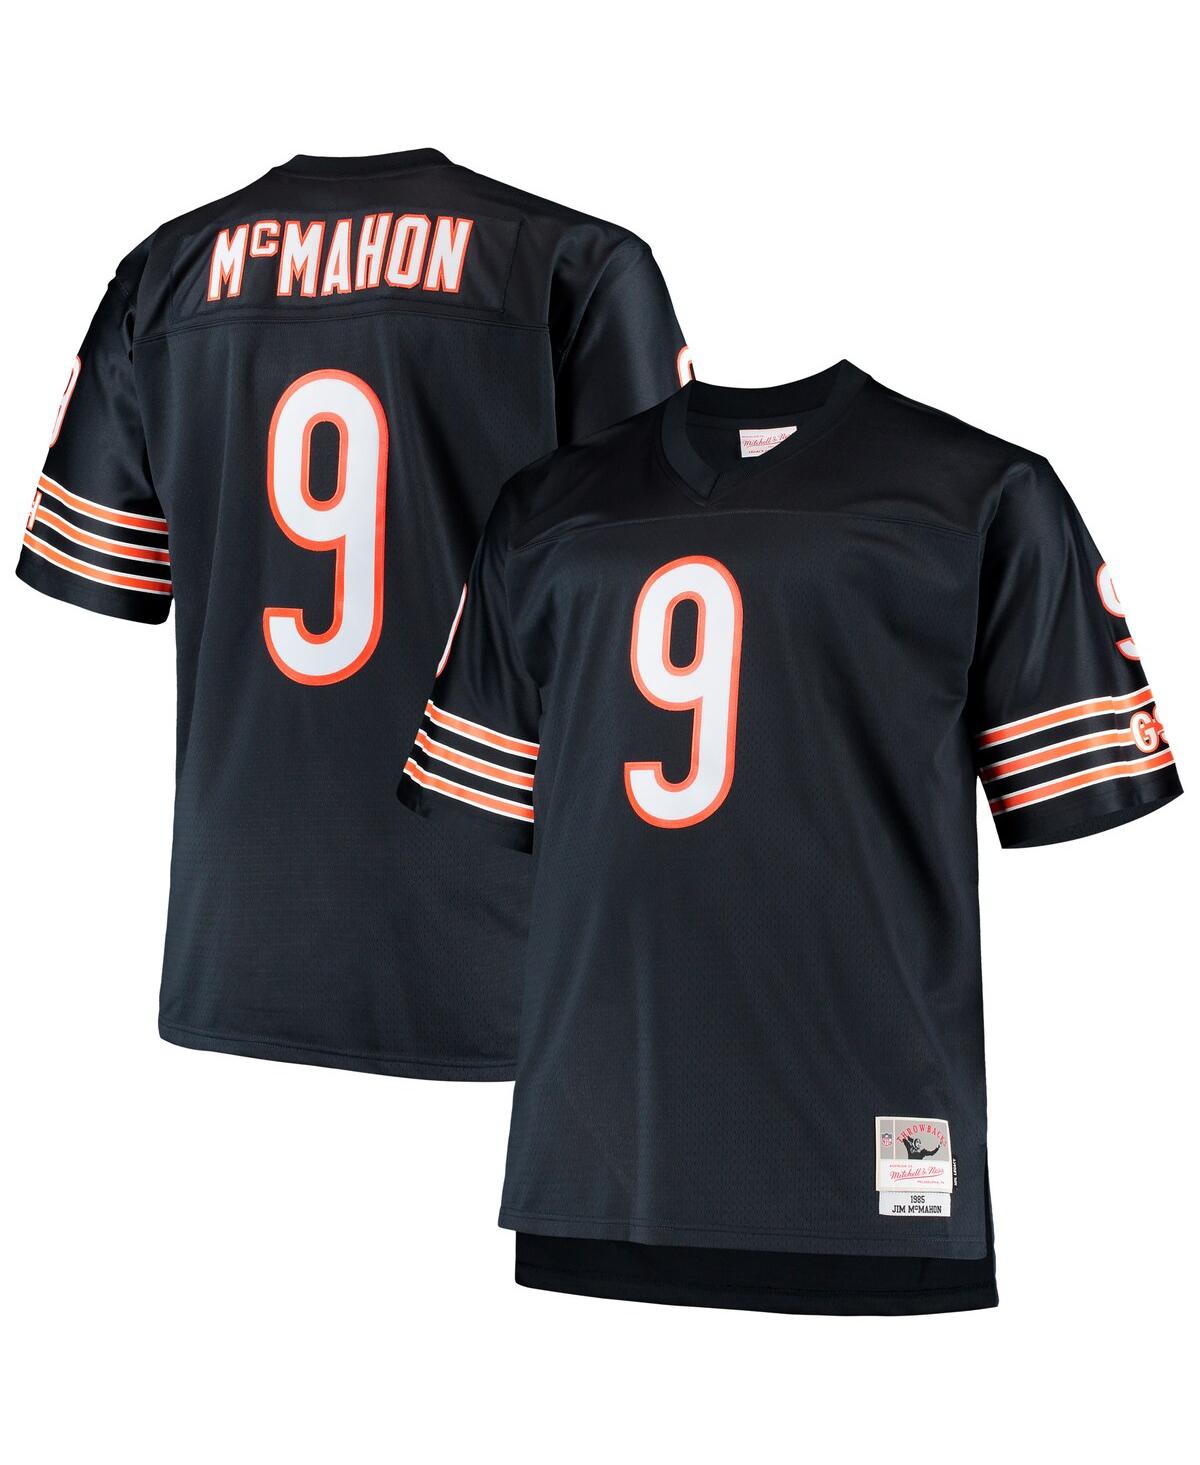 Men's Mitchell & Ness Jim McMahon Navy Chicago Bears Big and Tall 1985 Retired Player Replica Jersey - Navy